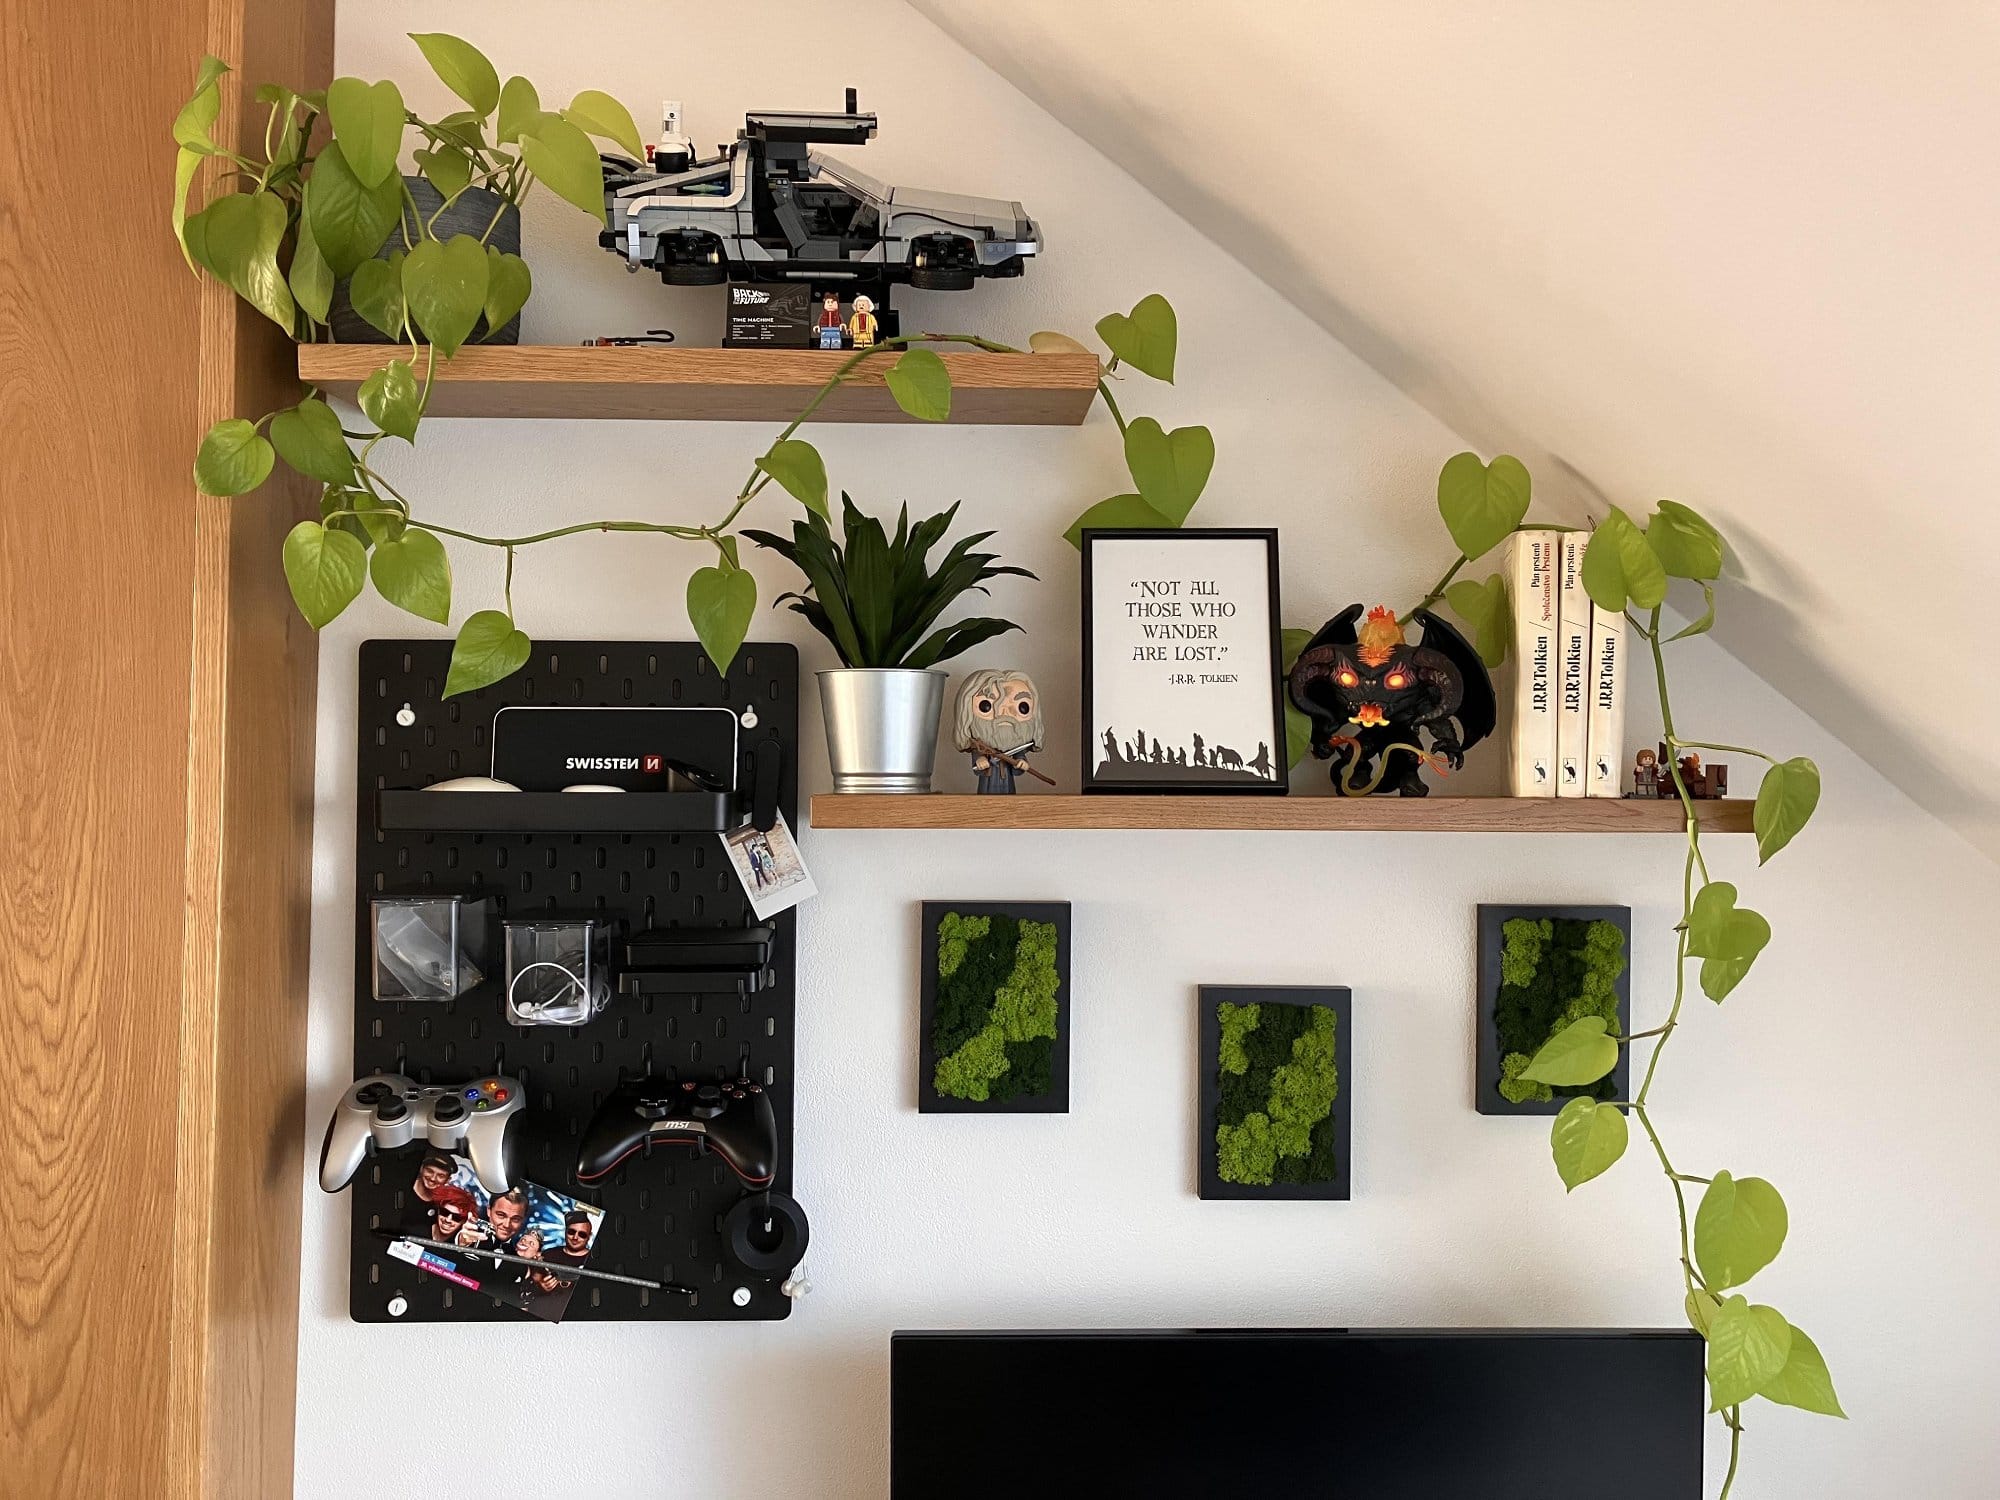 Shelves with plants and decor including a model car, books, framed quote, and figurines, alongside a pegboard holding gaming controllers and accessories